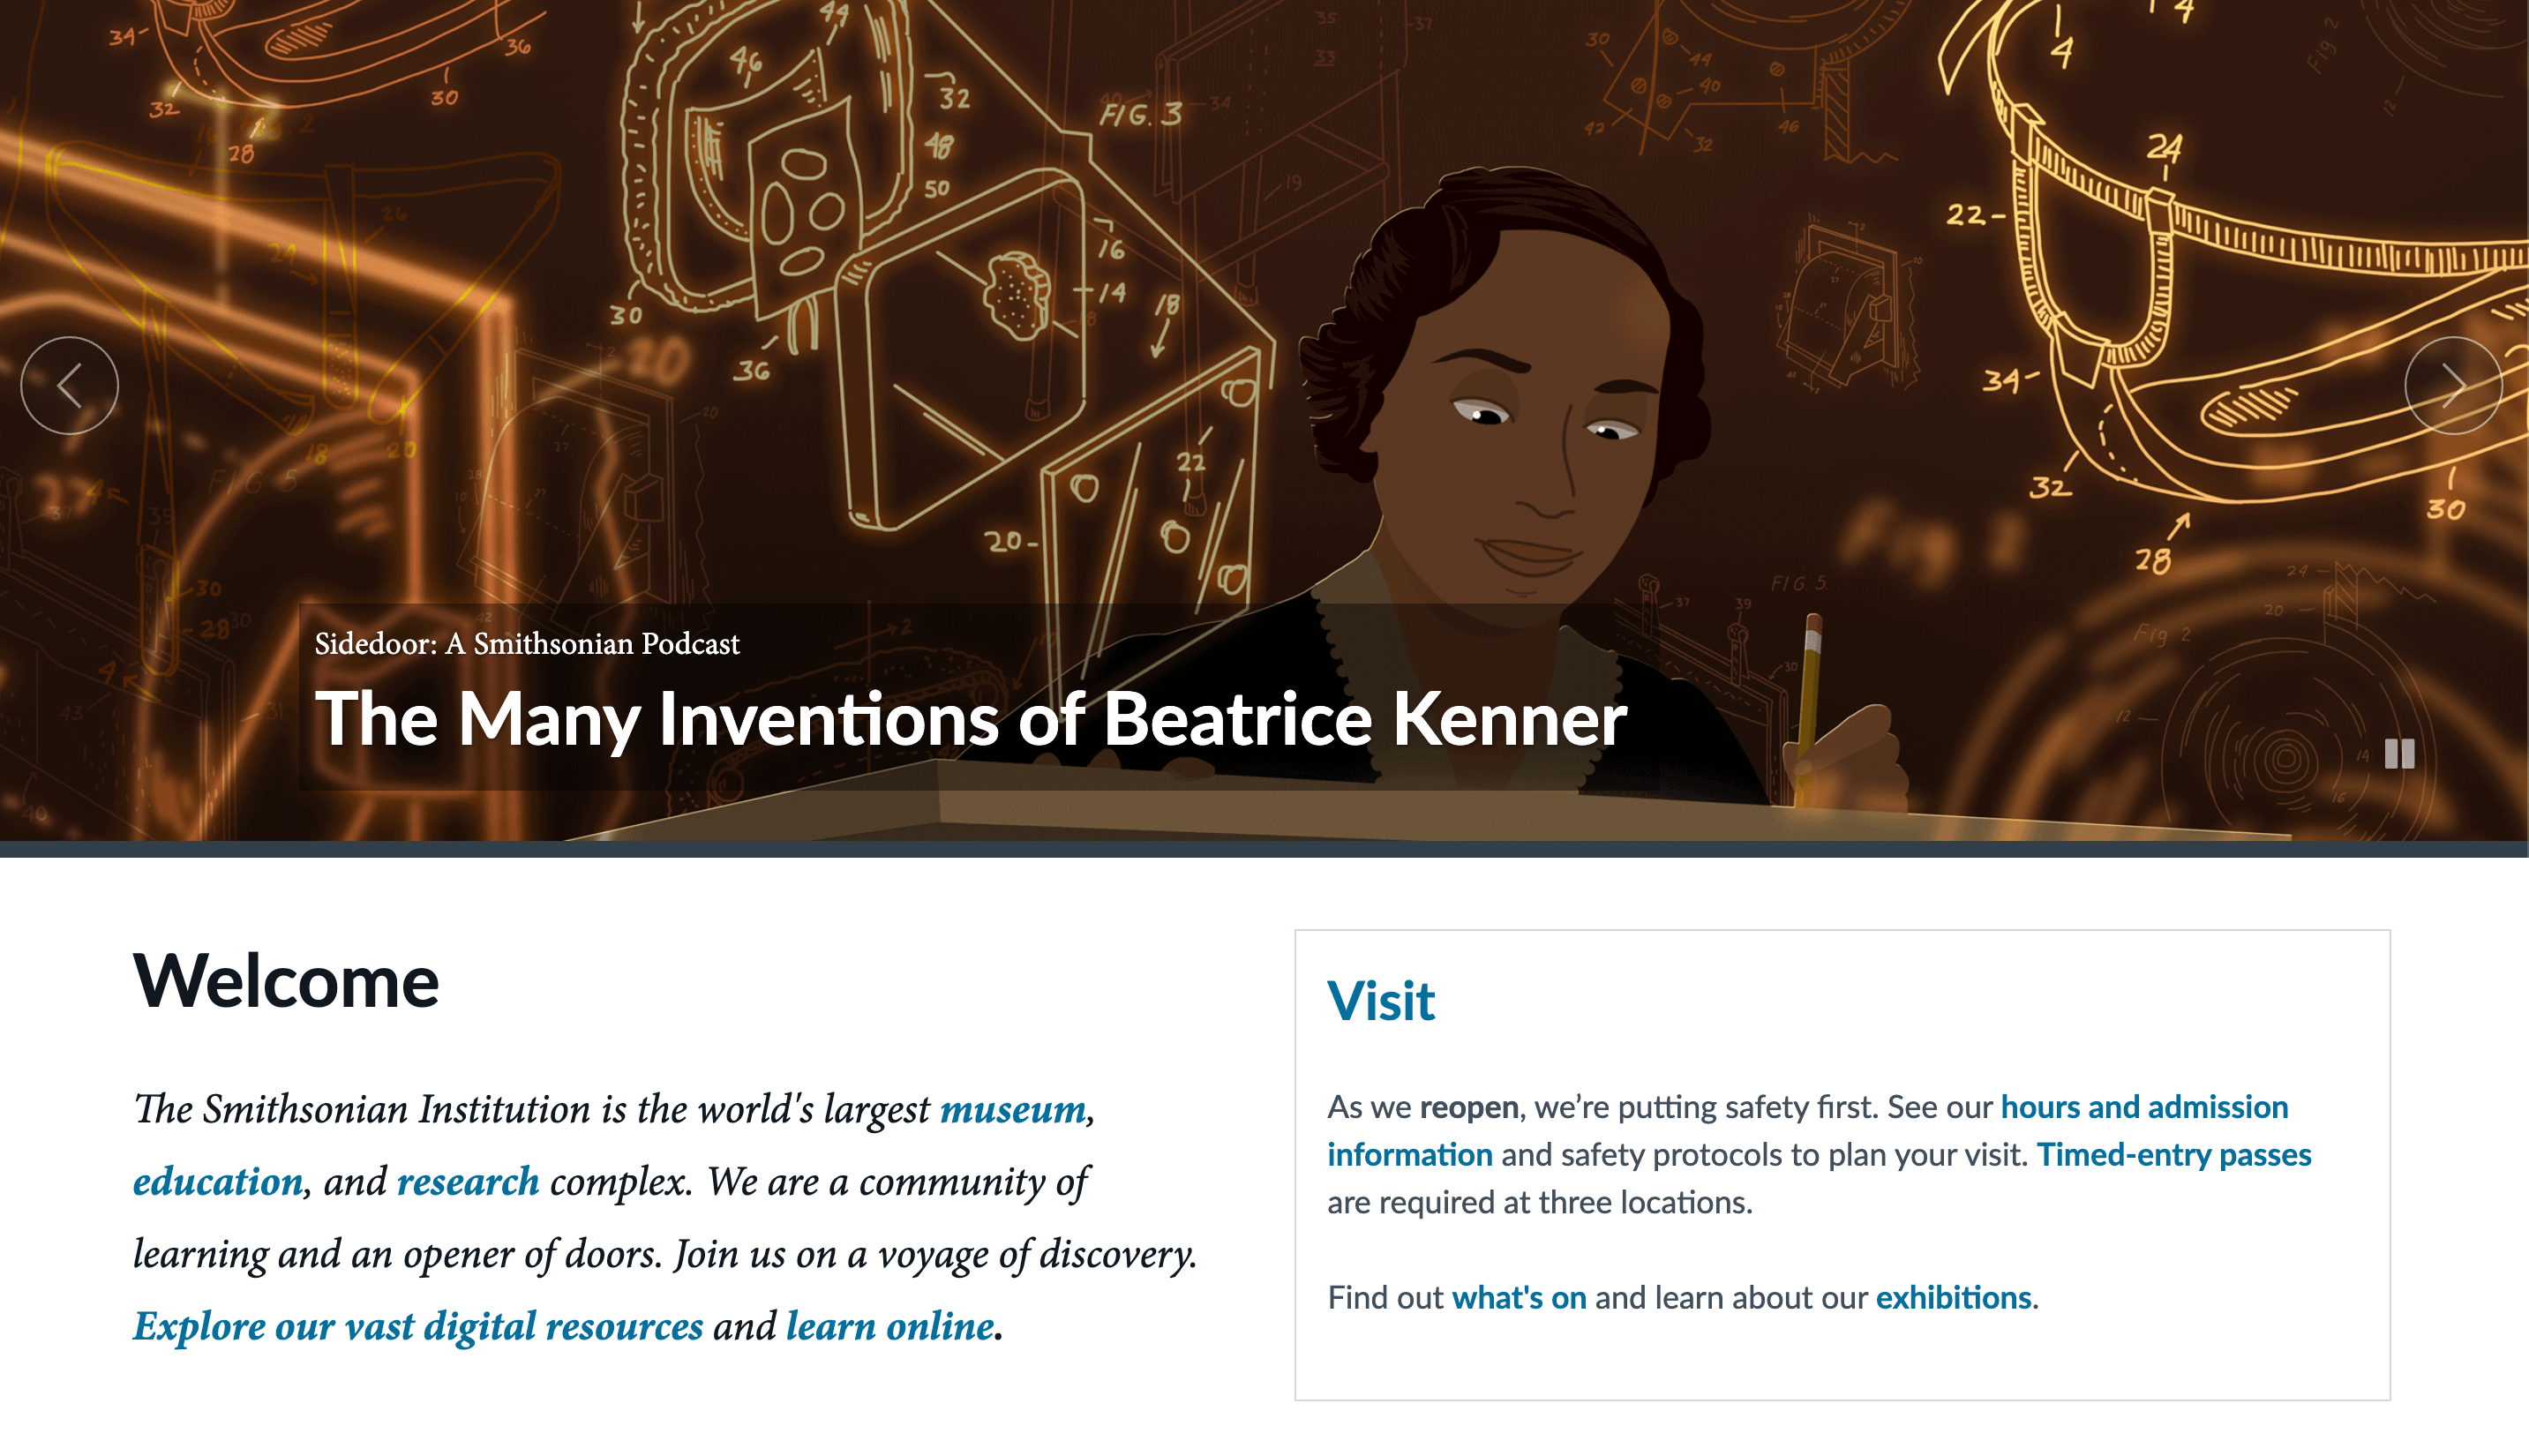 The Smithsonian Institution's home page featuring a promotion for their podcast episode about Beatrice Kenner